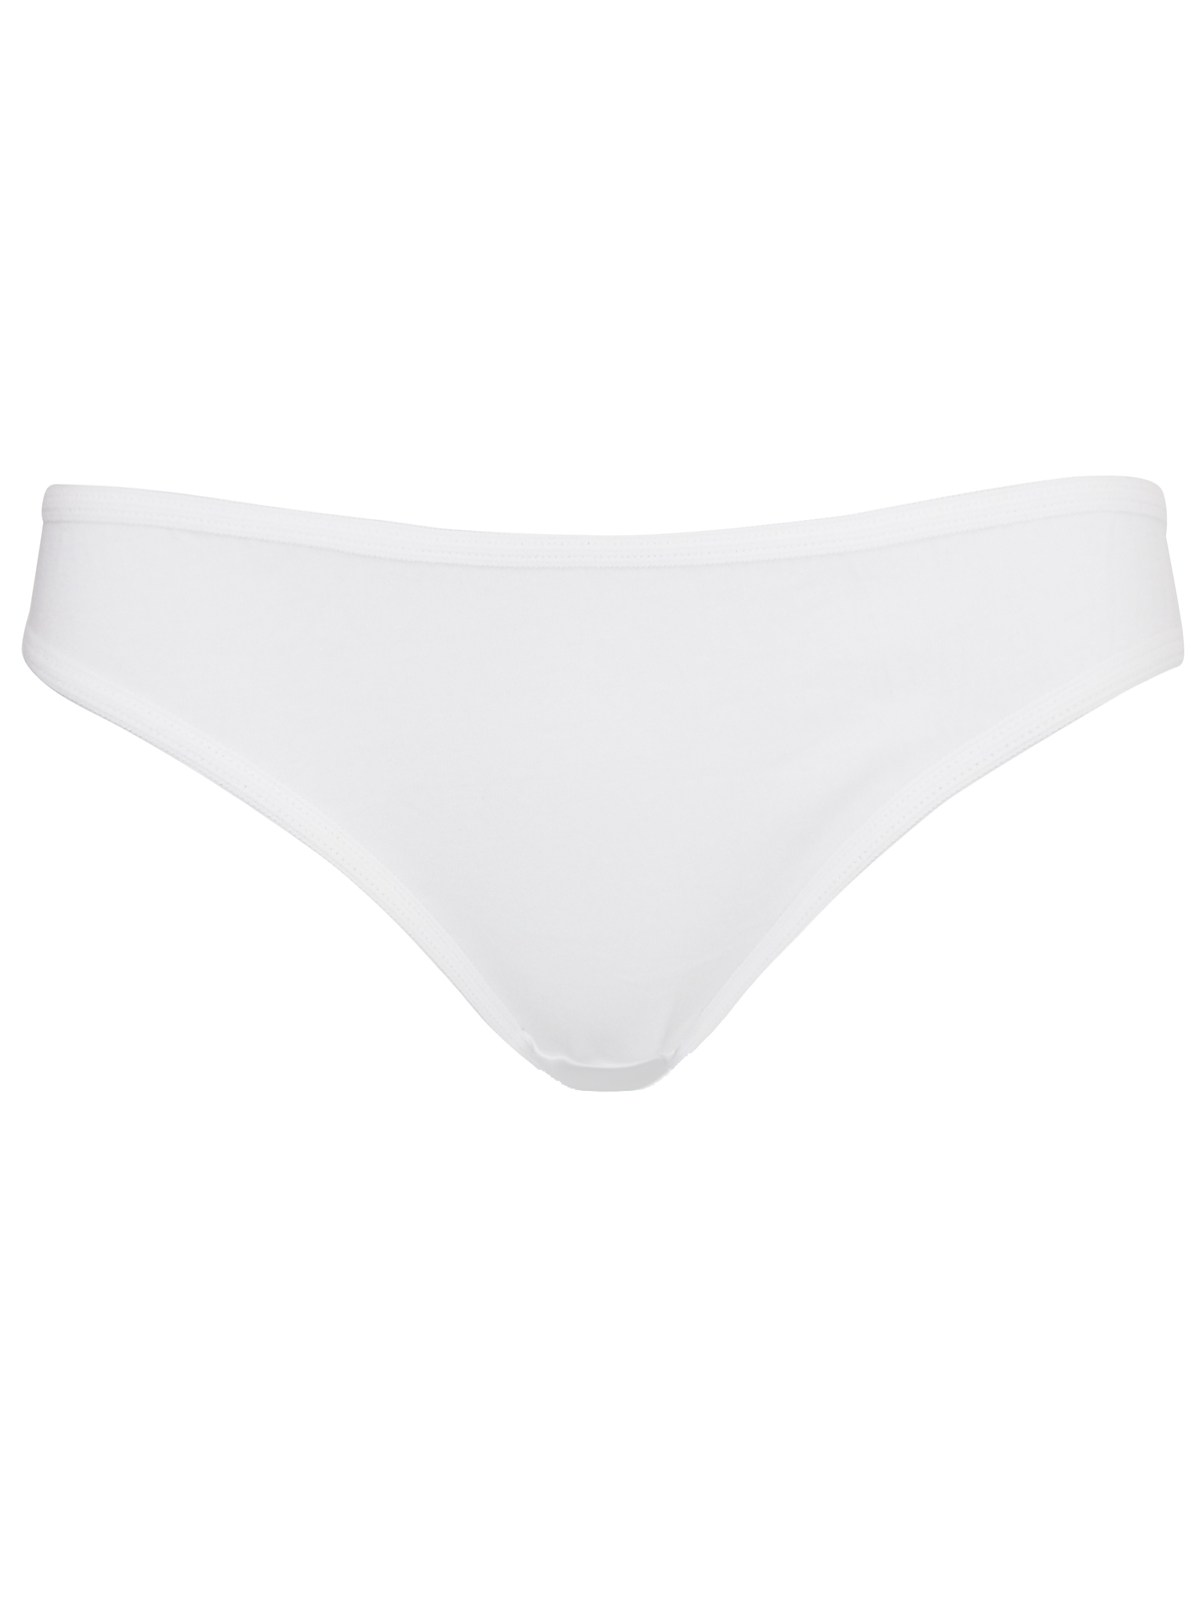 George - - WHITE 5-Pack Low Rise Bikini Knickers - Size 8 to 20